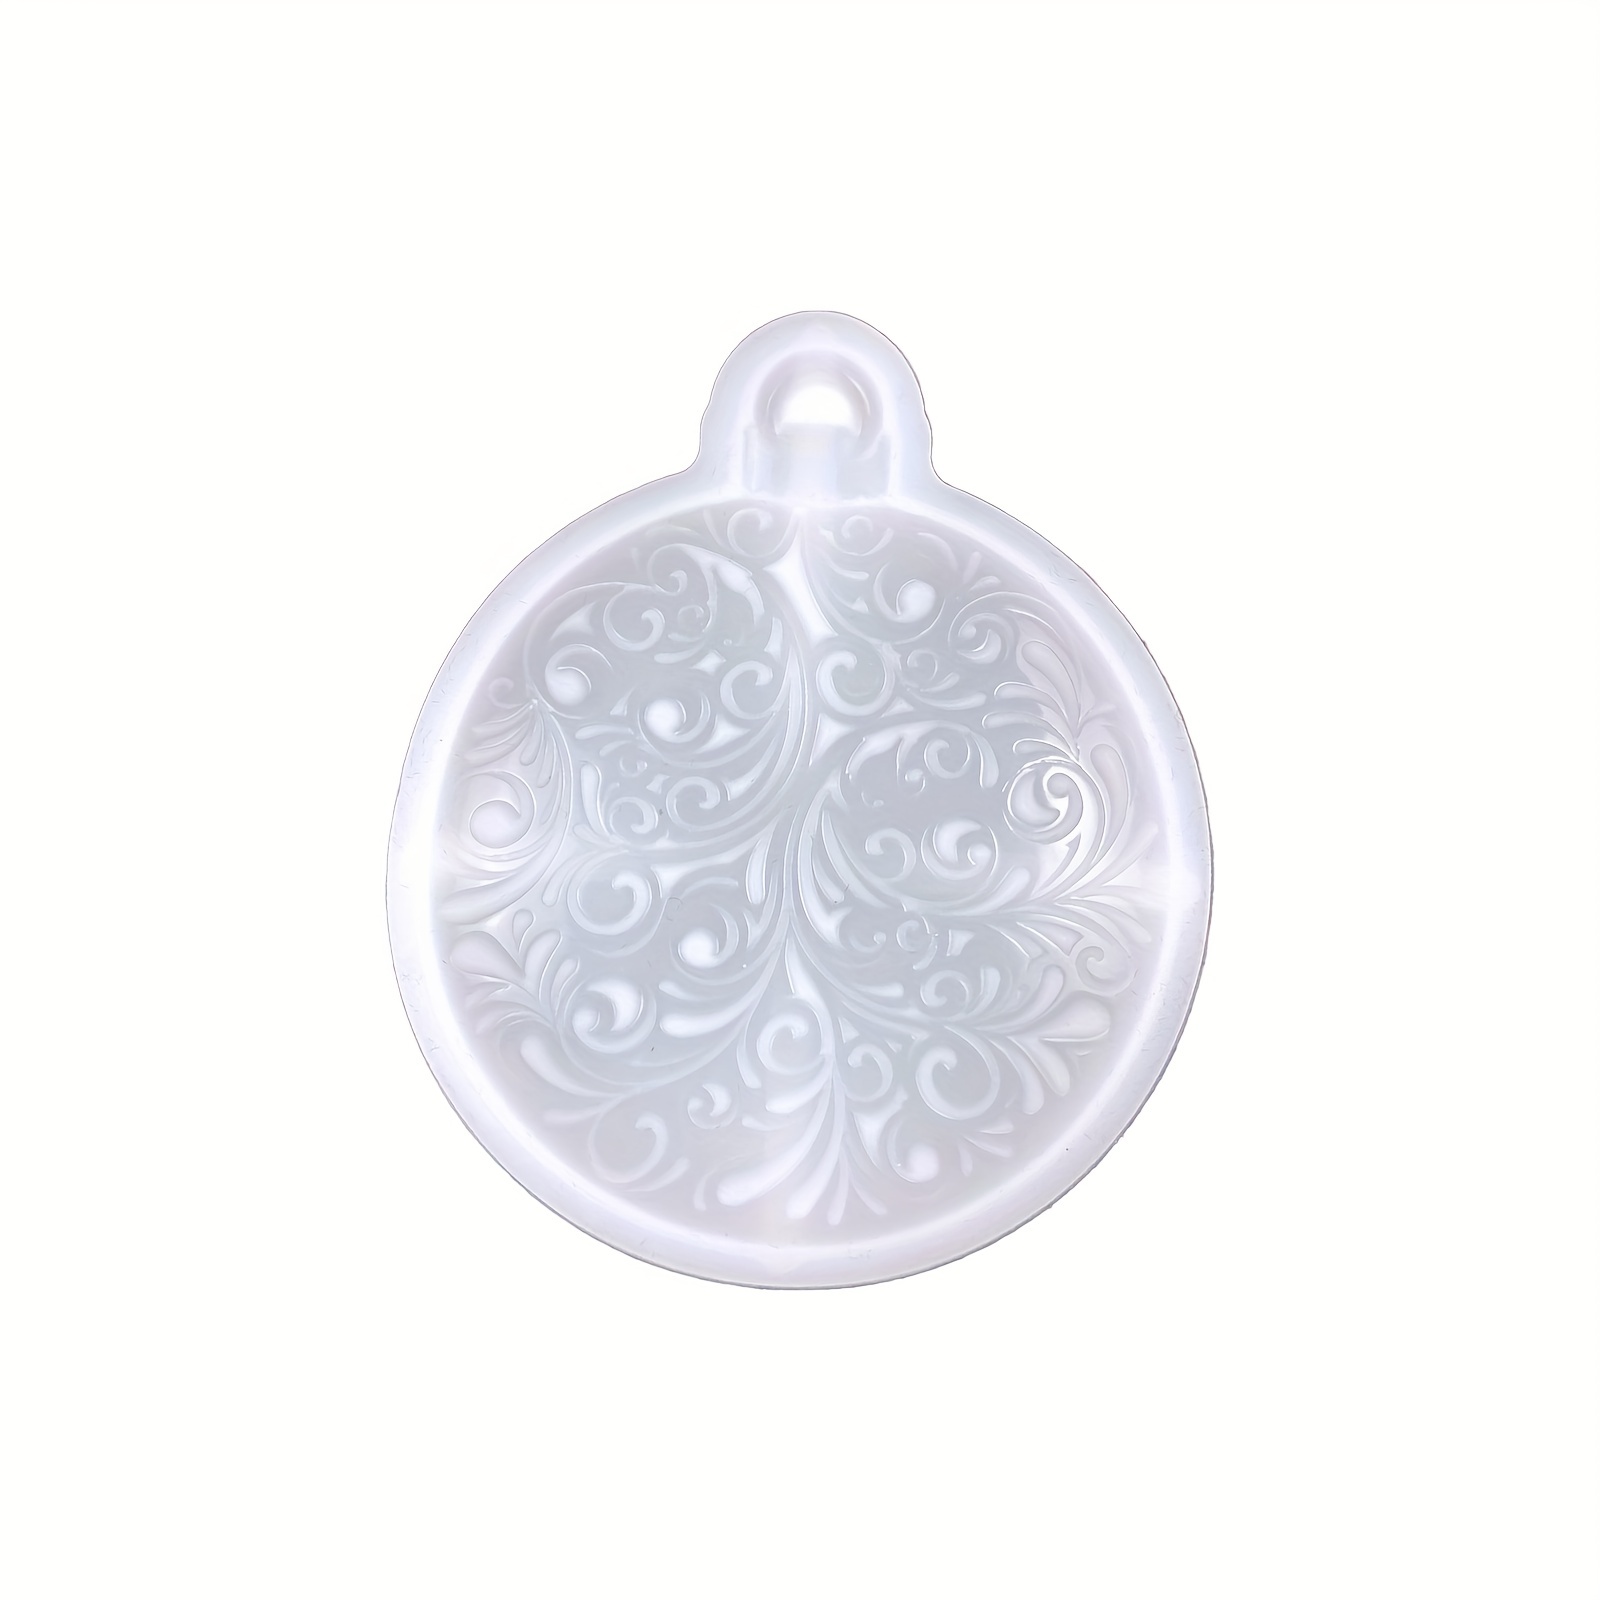 30pcs Keychain Resin Molds, TSV Silicone Epoxy Crafts Pendant Decor Molds  for DIY Christmas Gift 